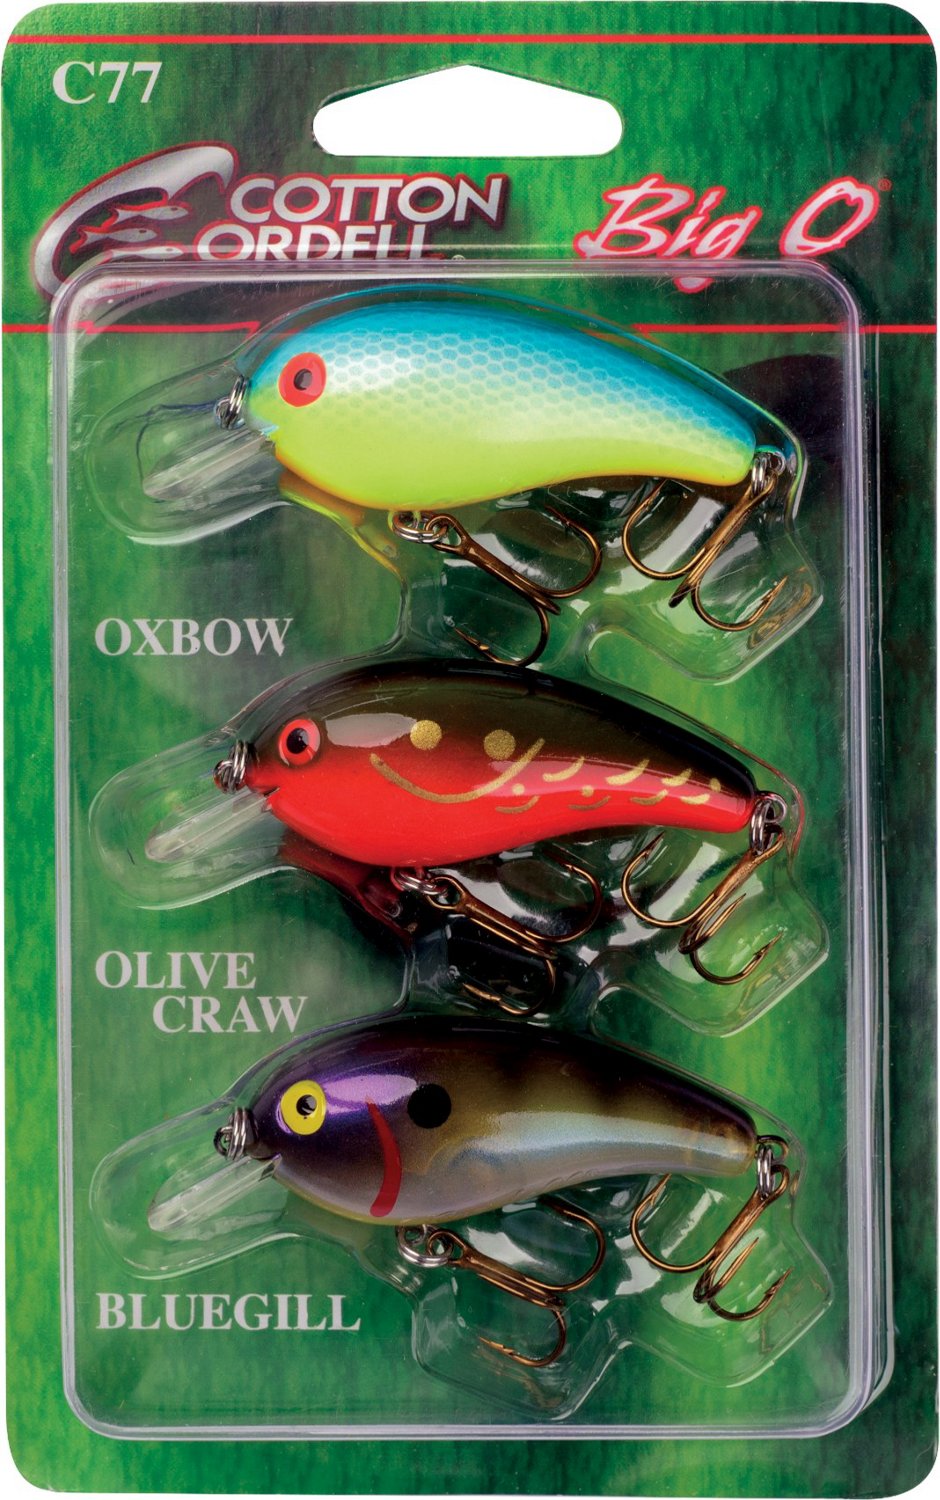 Cotton Cordell Big O Lure 3-Pack